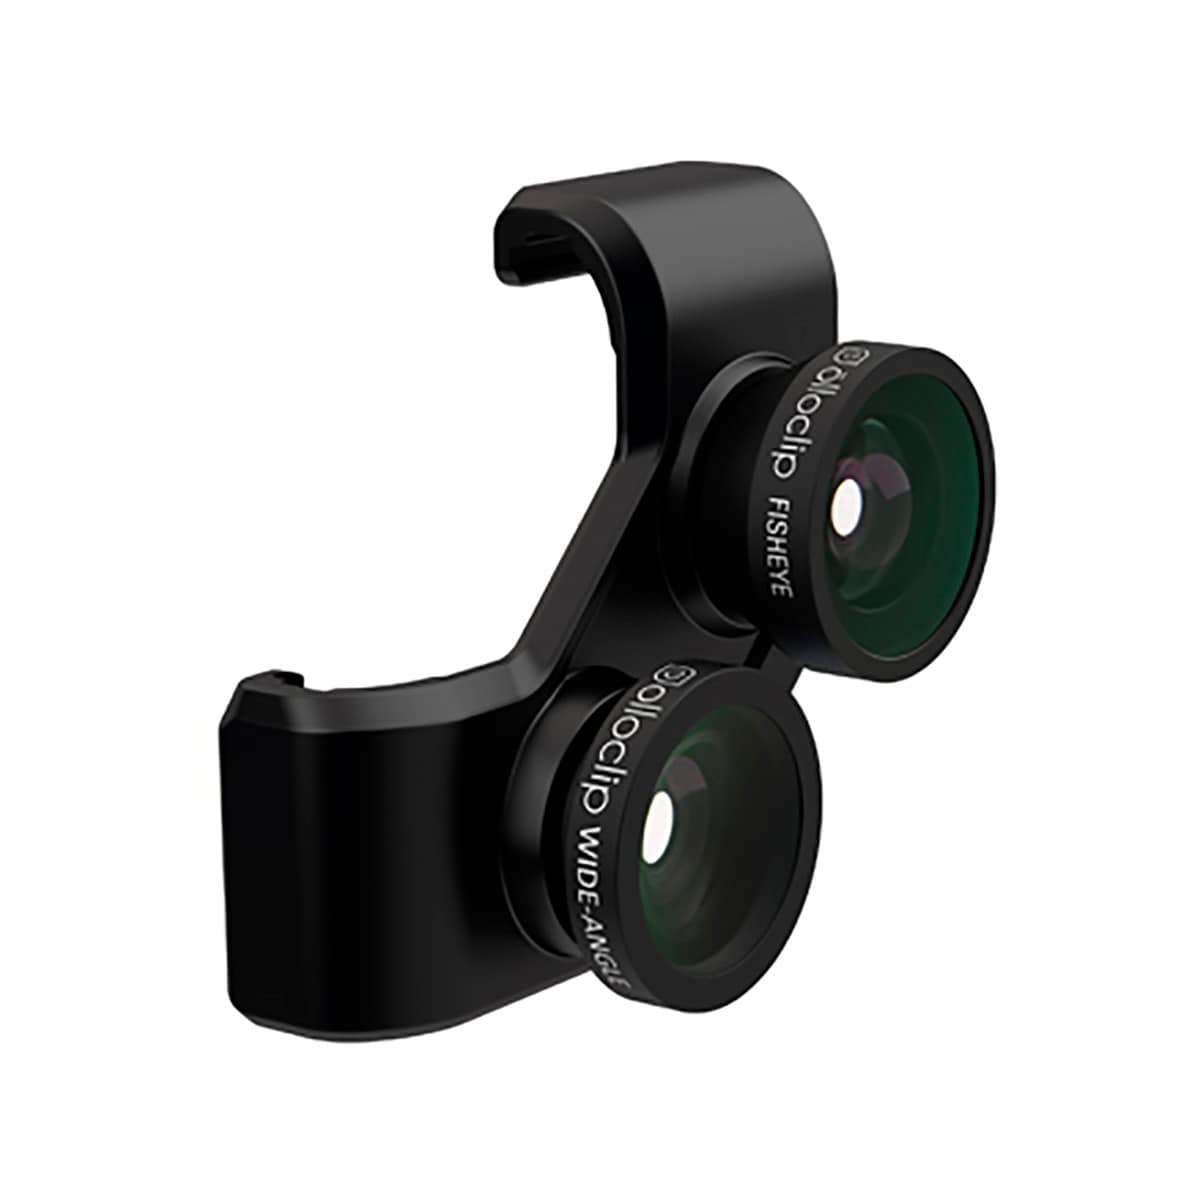 olloclip 4-In-1 Photo Lens for Samsung Galaxy S4 Black, One Size